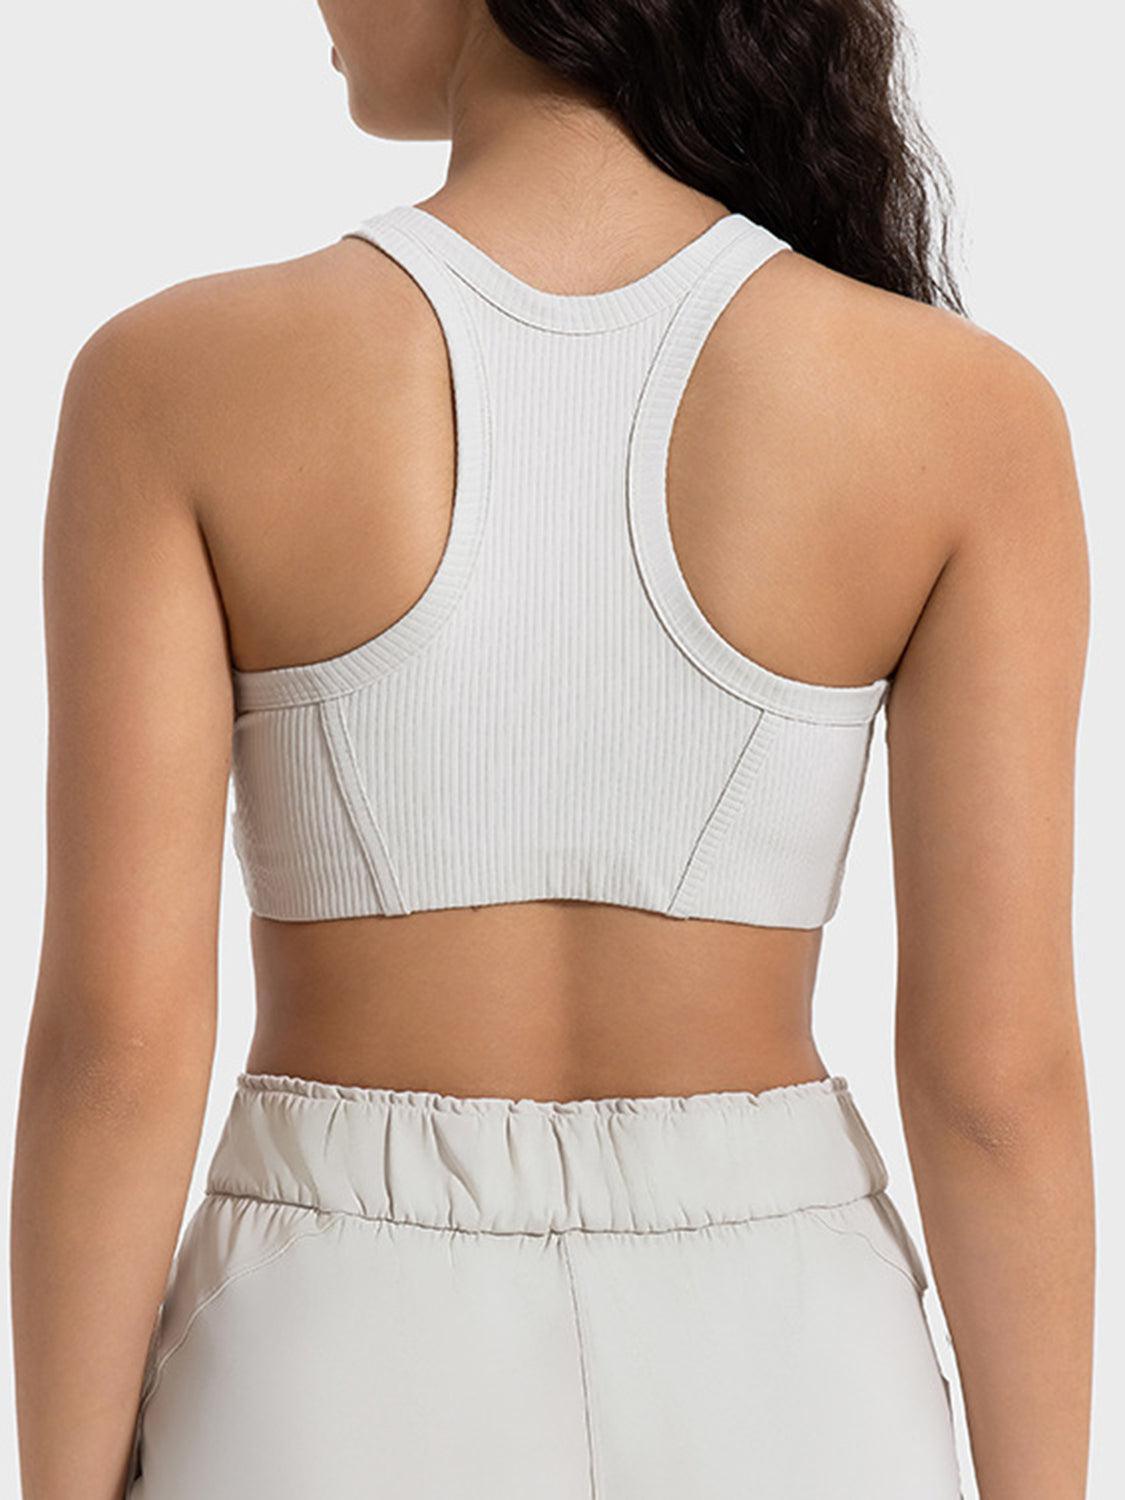 the back of a woman wearing a white crop top